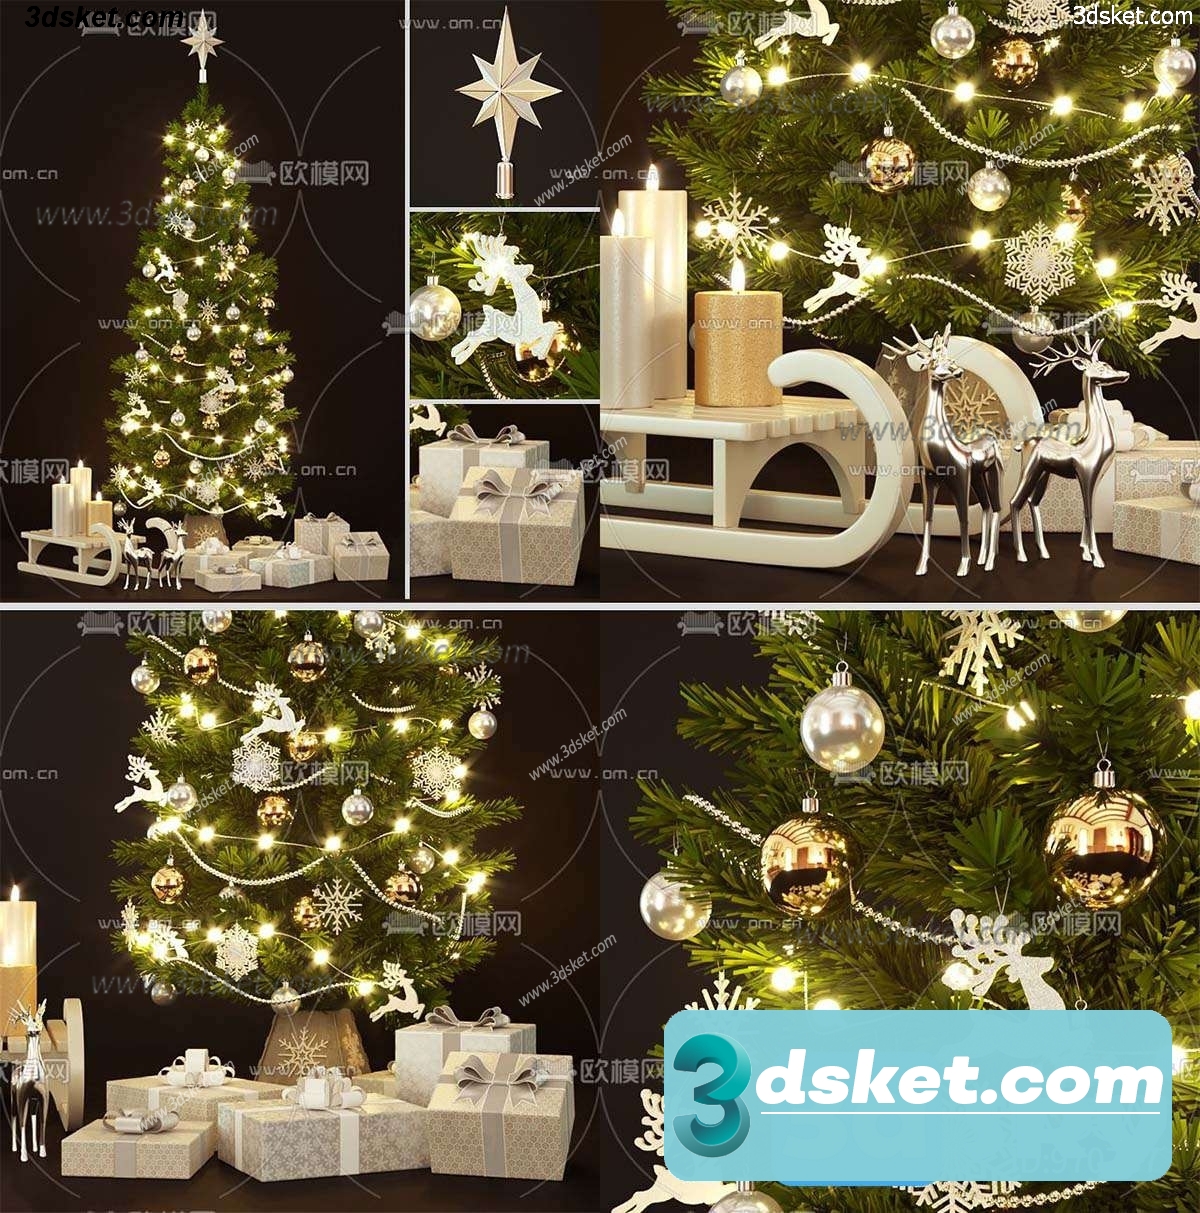 3D Model Holiday Free Download 026